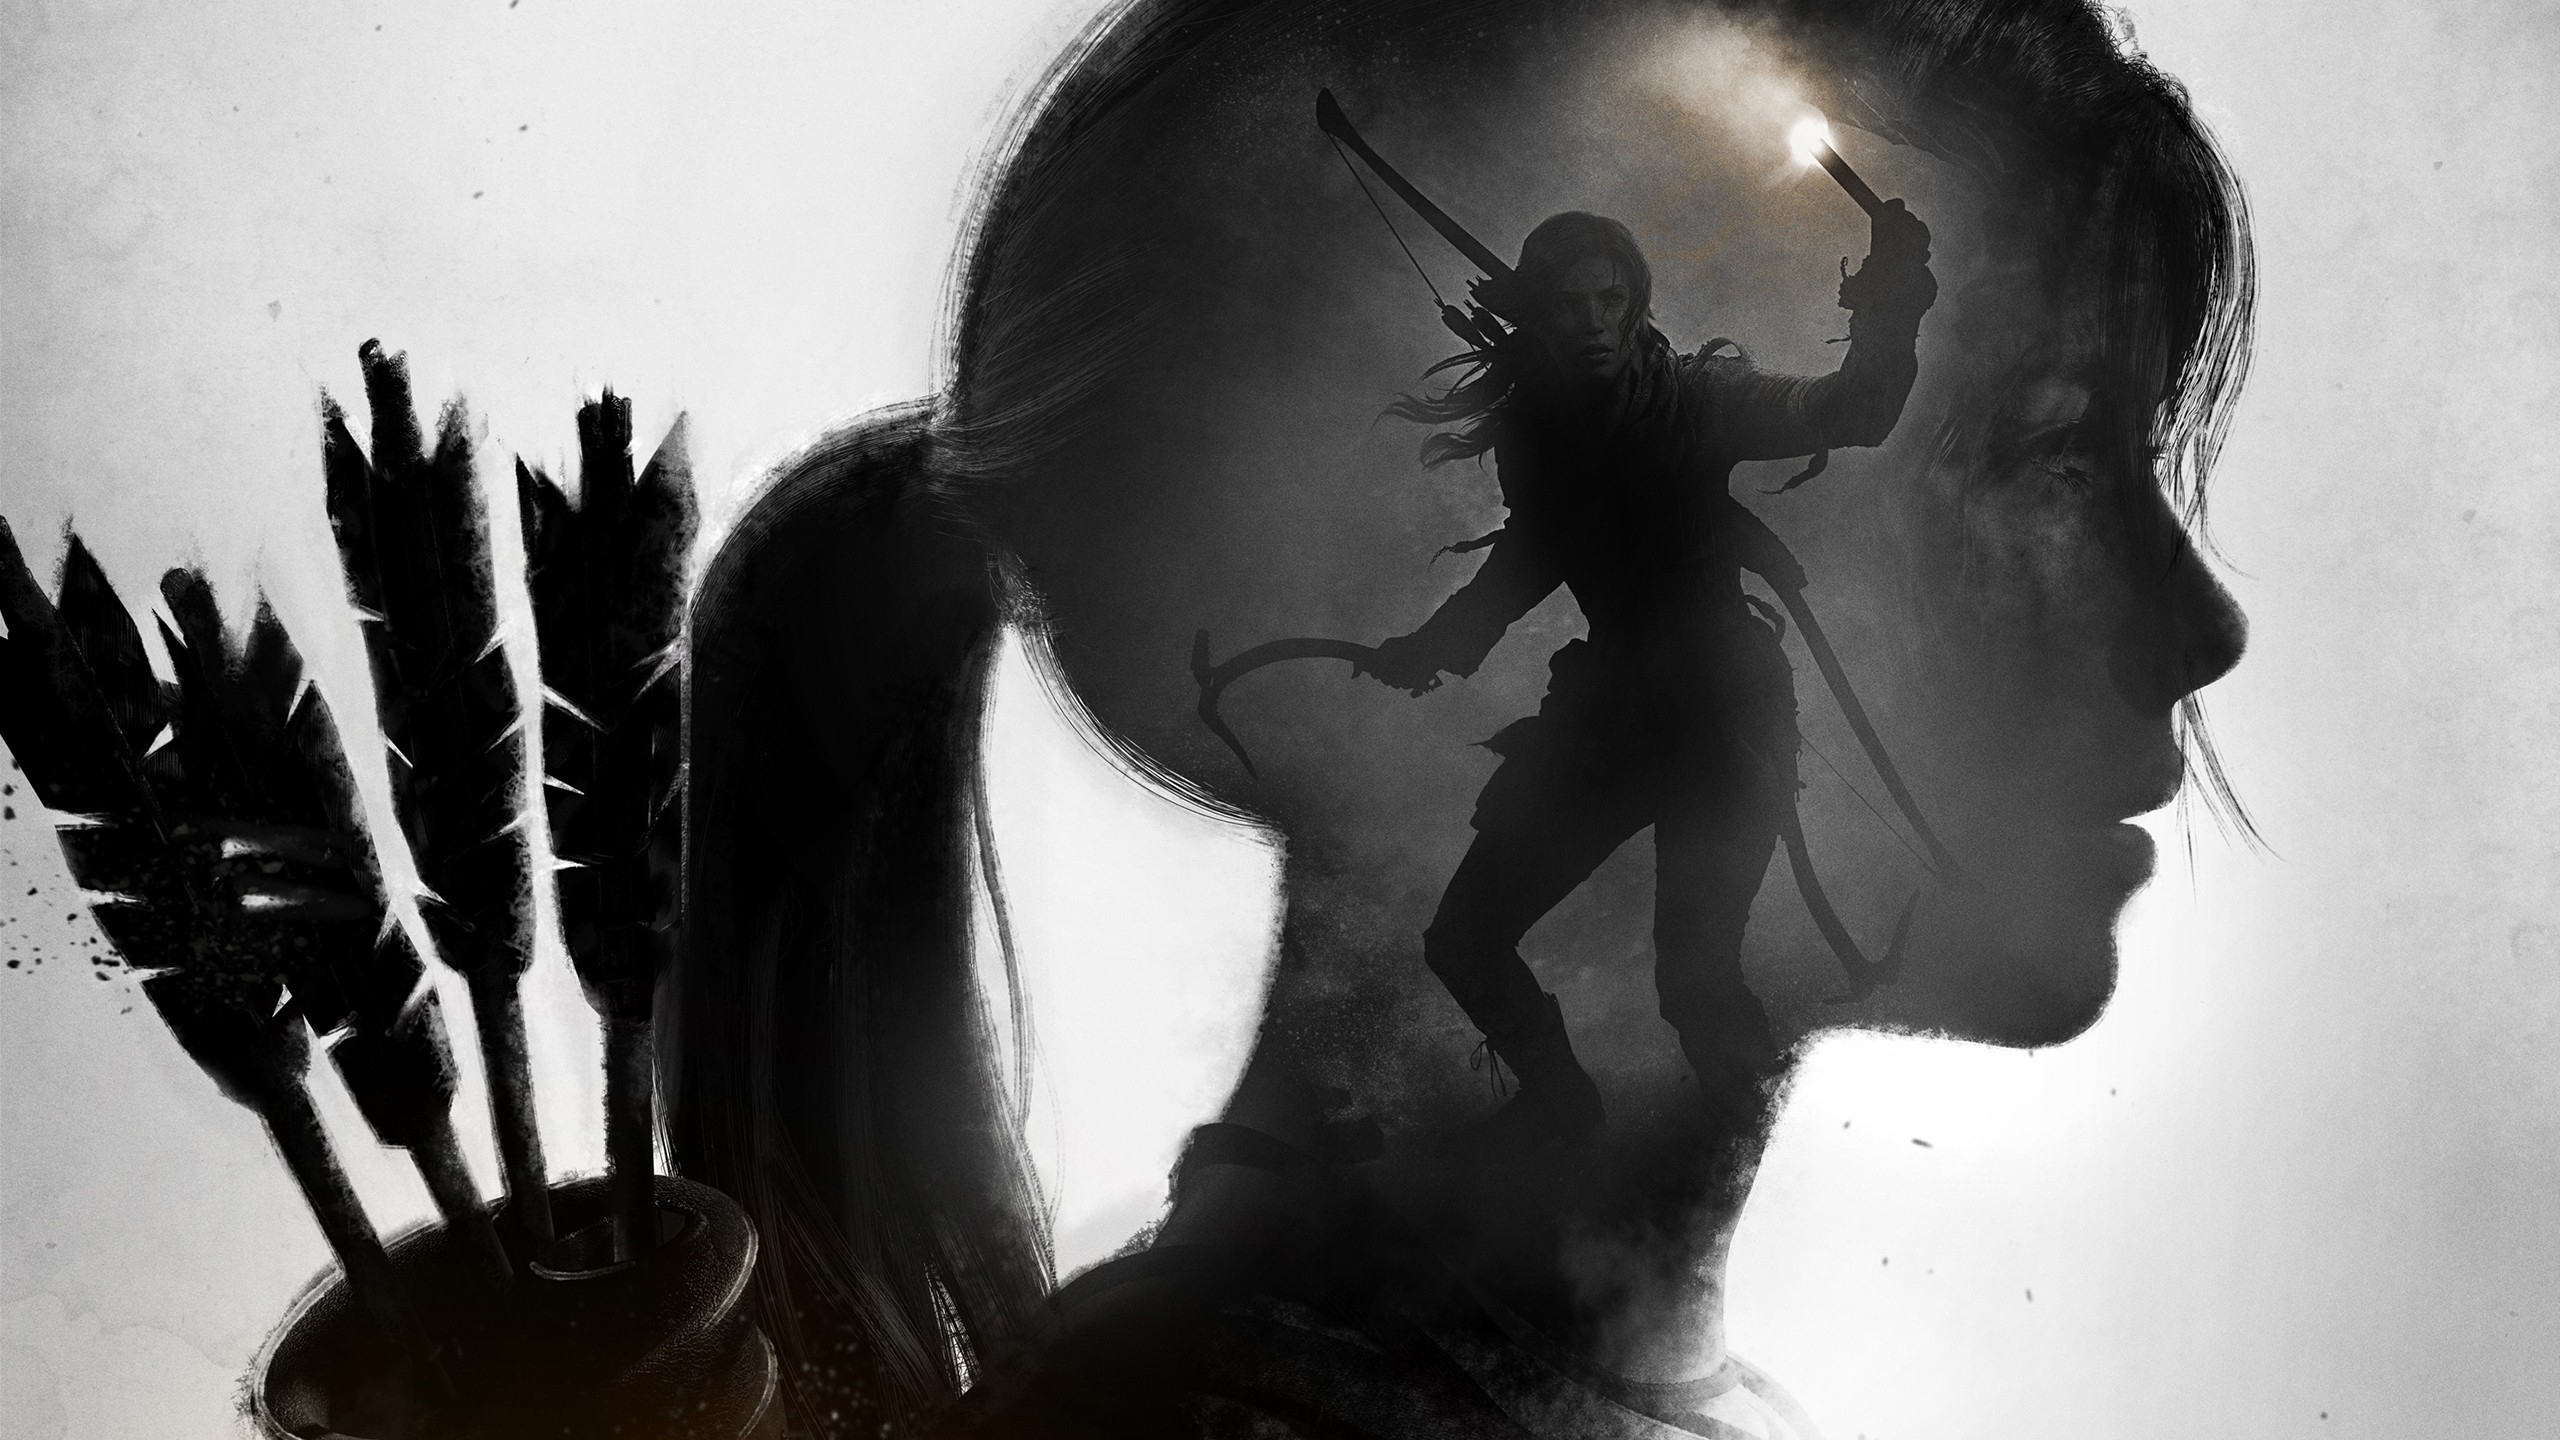 2560x1440 Wallpaper : silhouette, DLC, PC gaming, Rise of the Tomb Raider, darkness, px, computer wallpaper, black and white, monochrome photography wallpaperUp 827250 HD Wallpapers